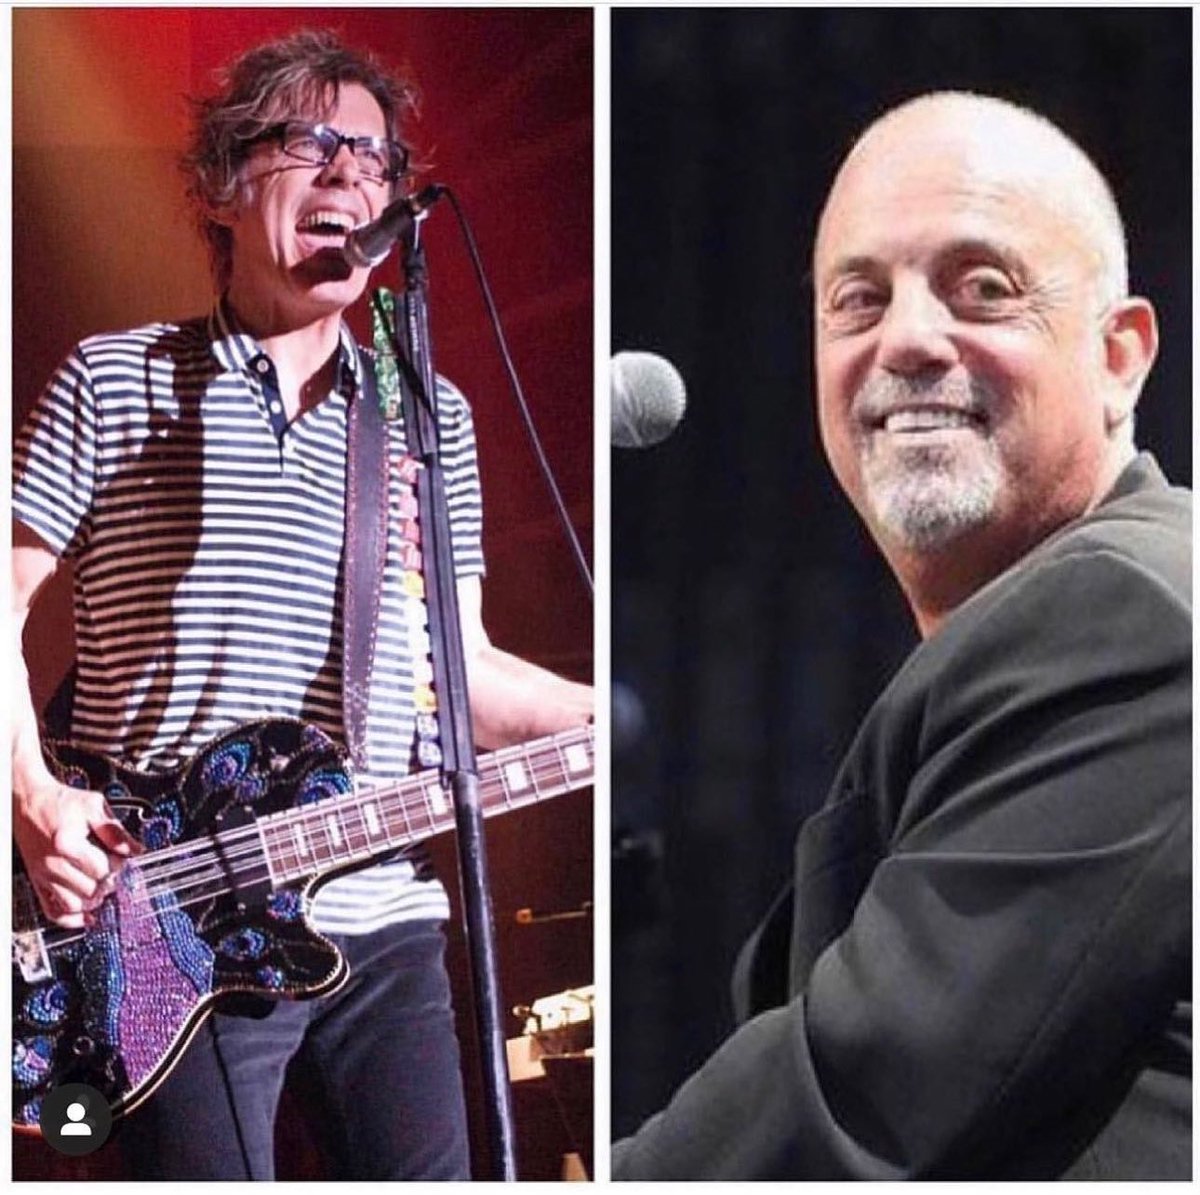 Celebrating a couple of #classics today; Happy Birthday! @CheapTrickTom (74) and @billyjoel (75). Keep it on @LoneStar925 as we honor these two rockers with their best songs. #ClassicRock #iHeartRadio